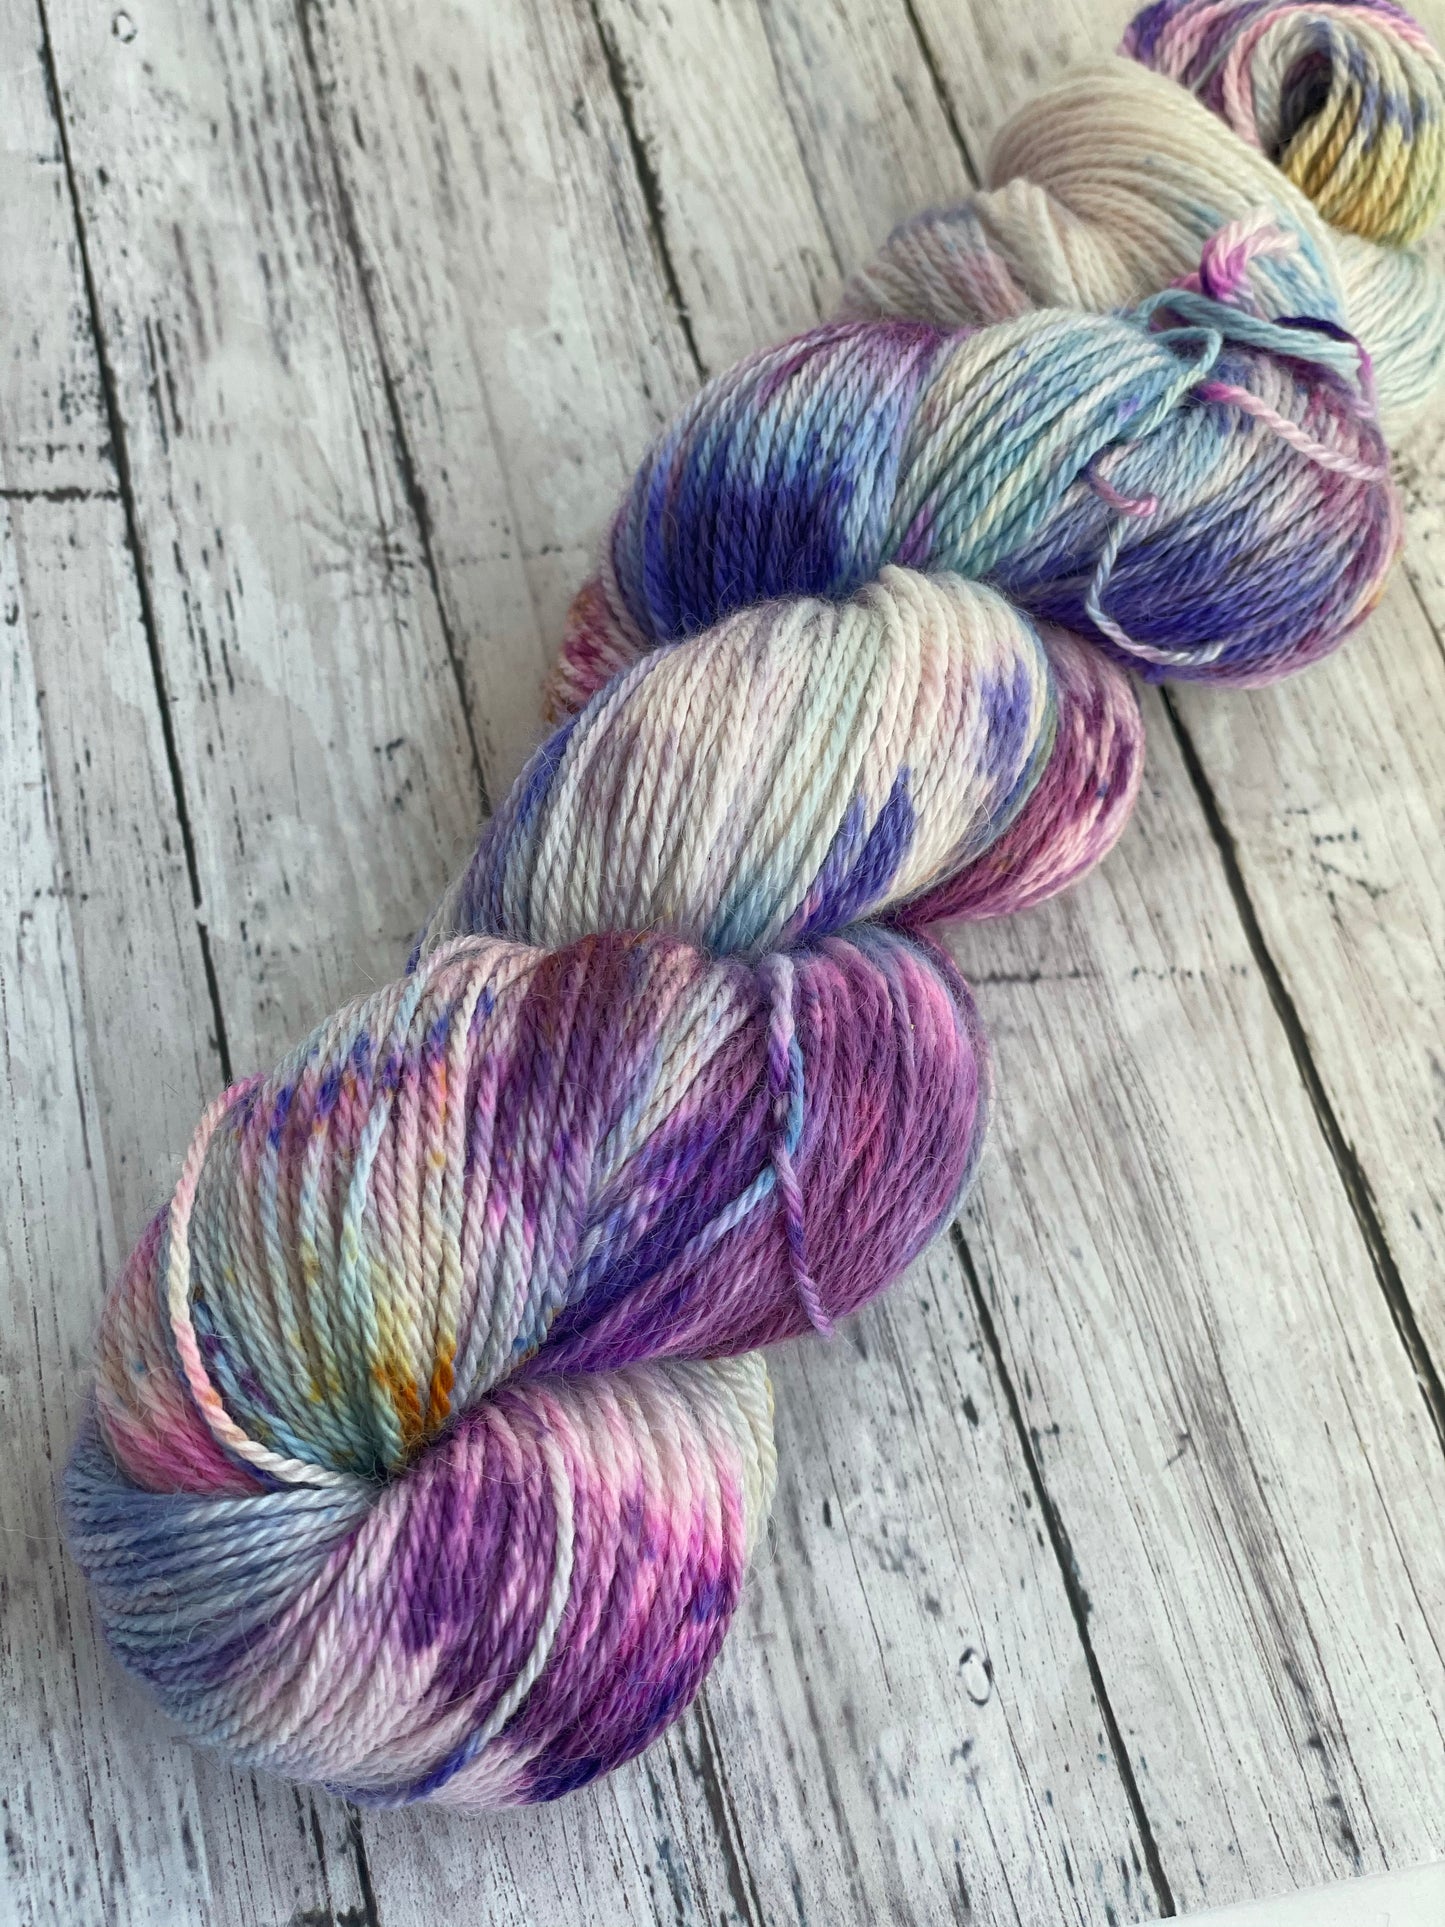 Picasso Calla Lily - Lappier - Hand Dyed Baby Alpaca Sock Yarn